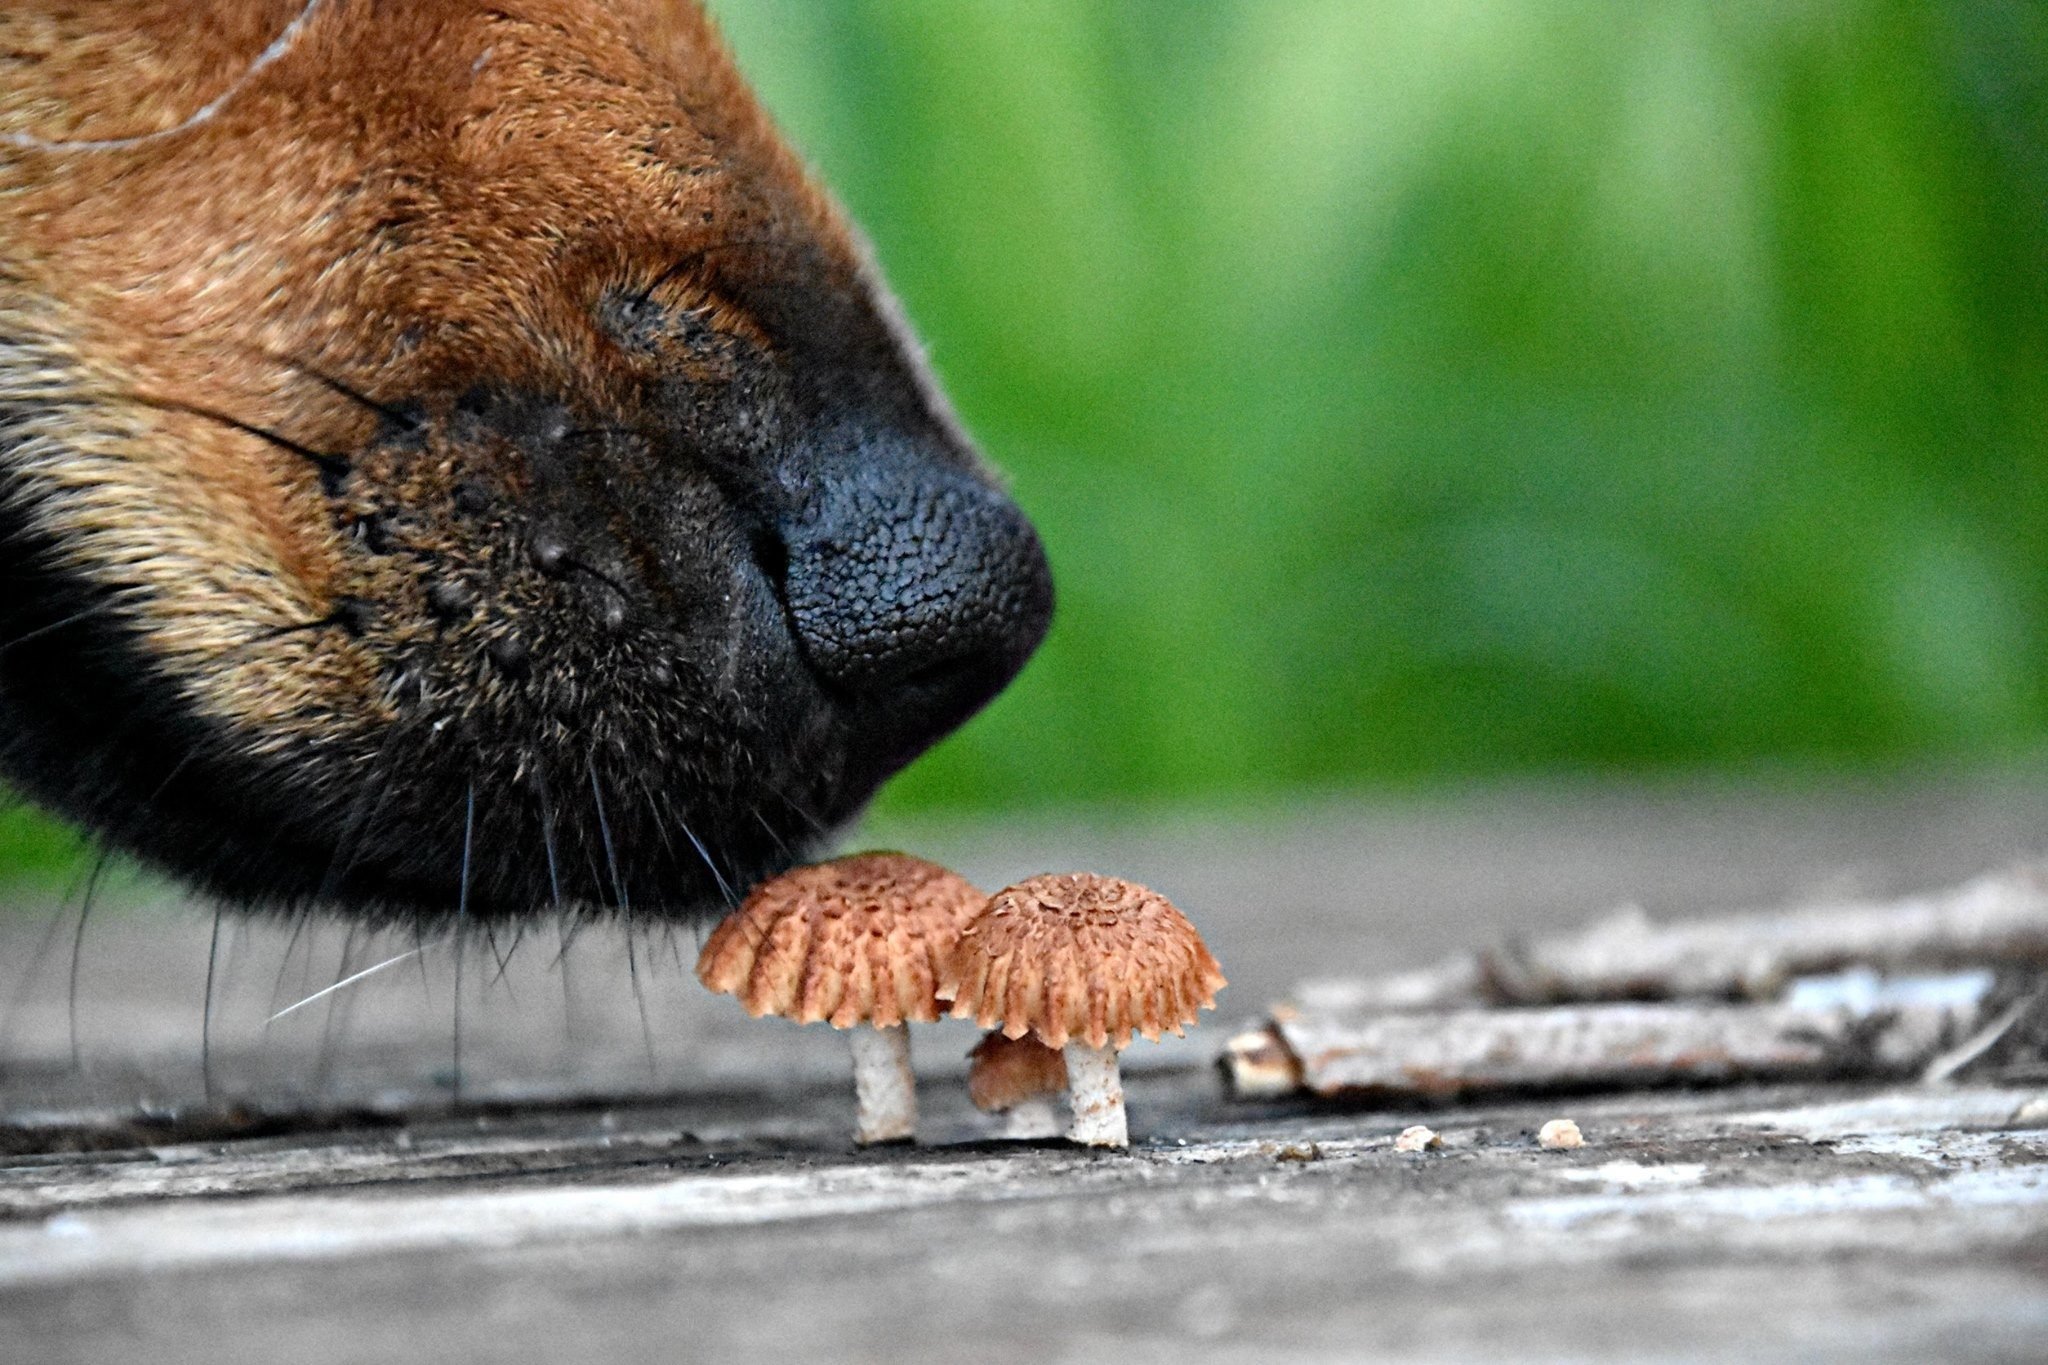 Can Dogs Eat Mushrooms? Here's What Experts Say